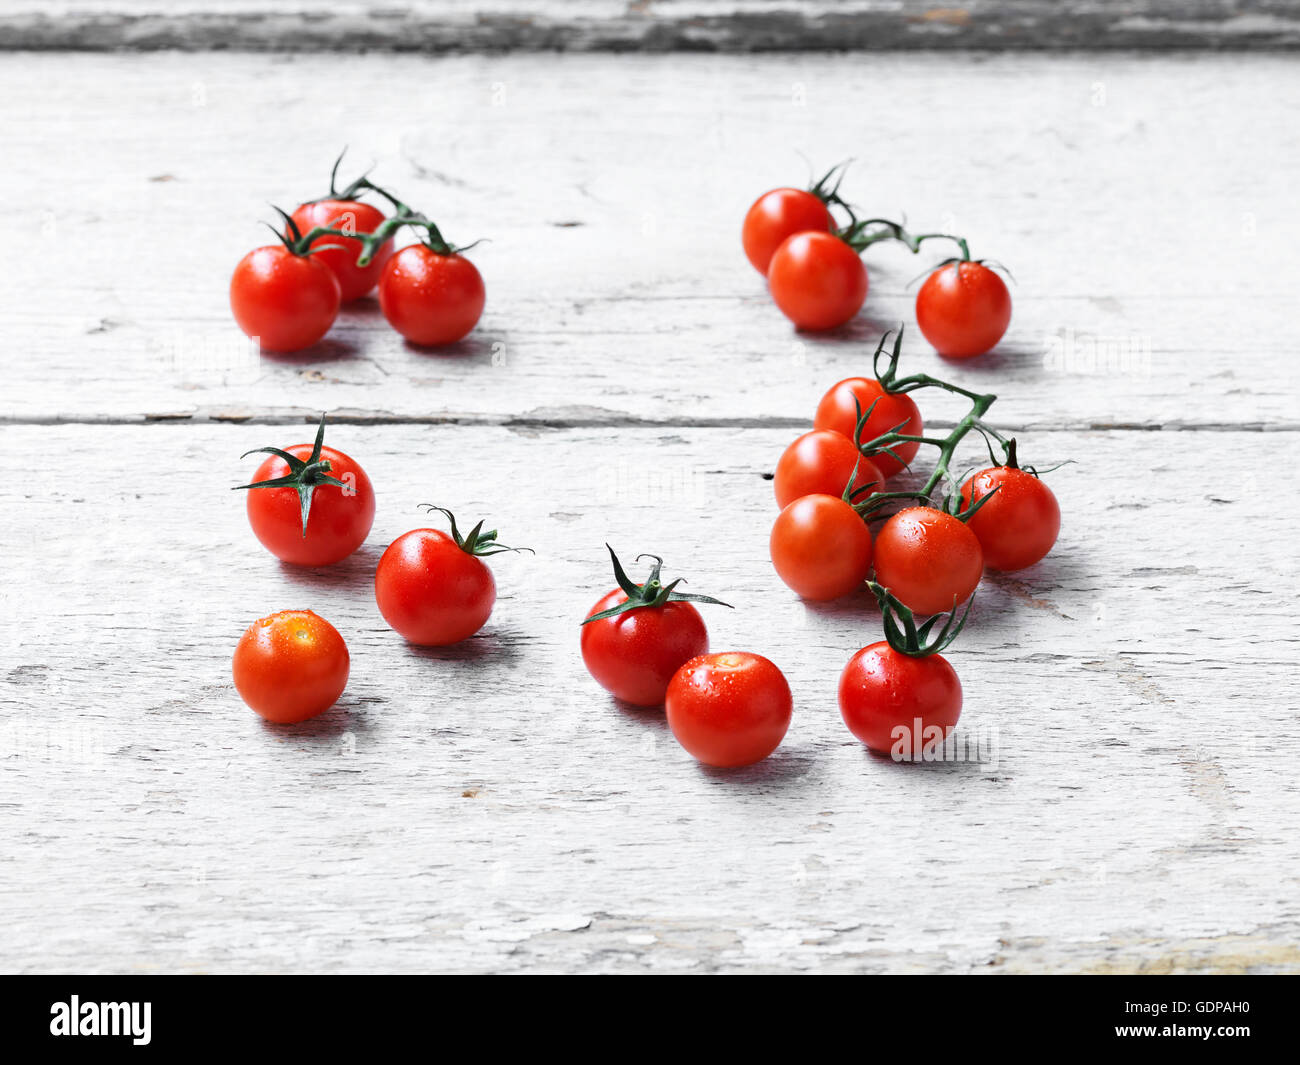 Cherry tomatoes whitewashed wooden surface Stock Photo